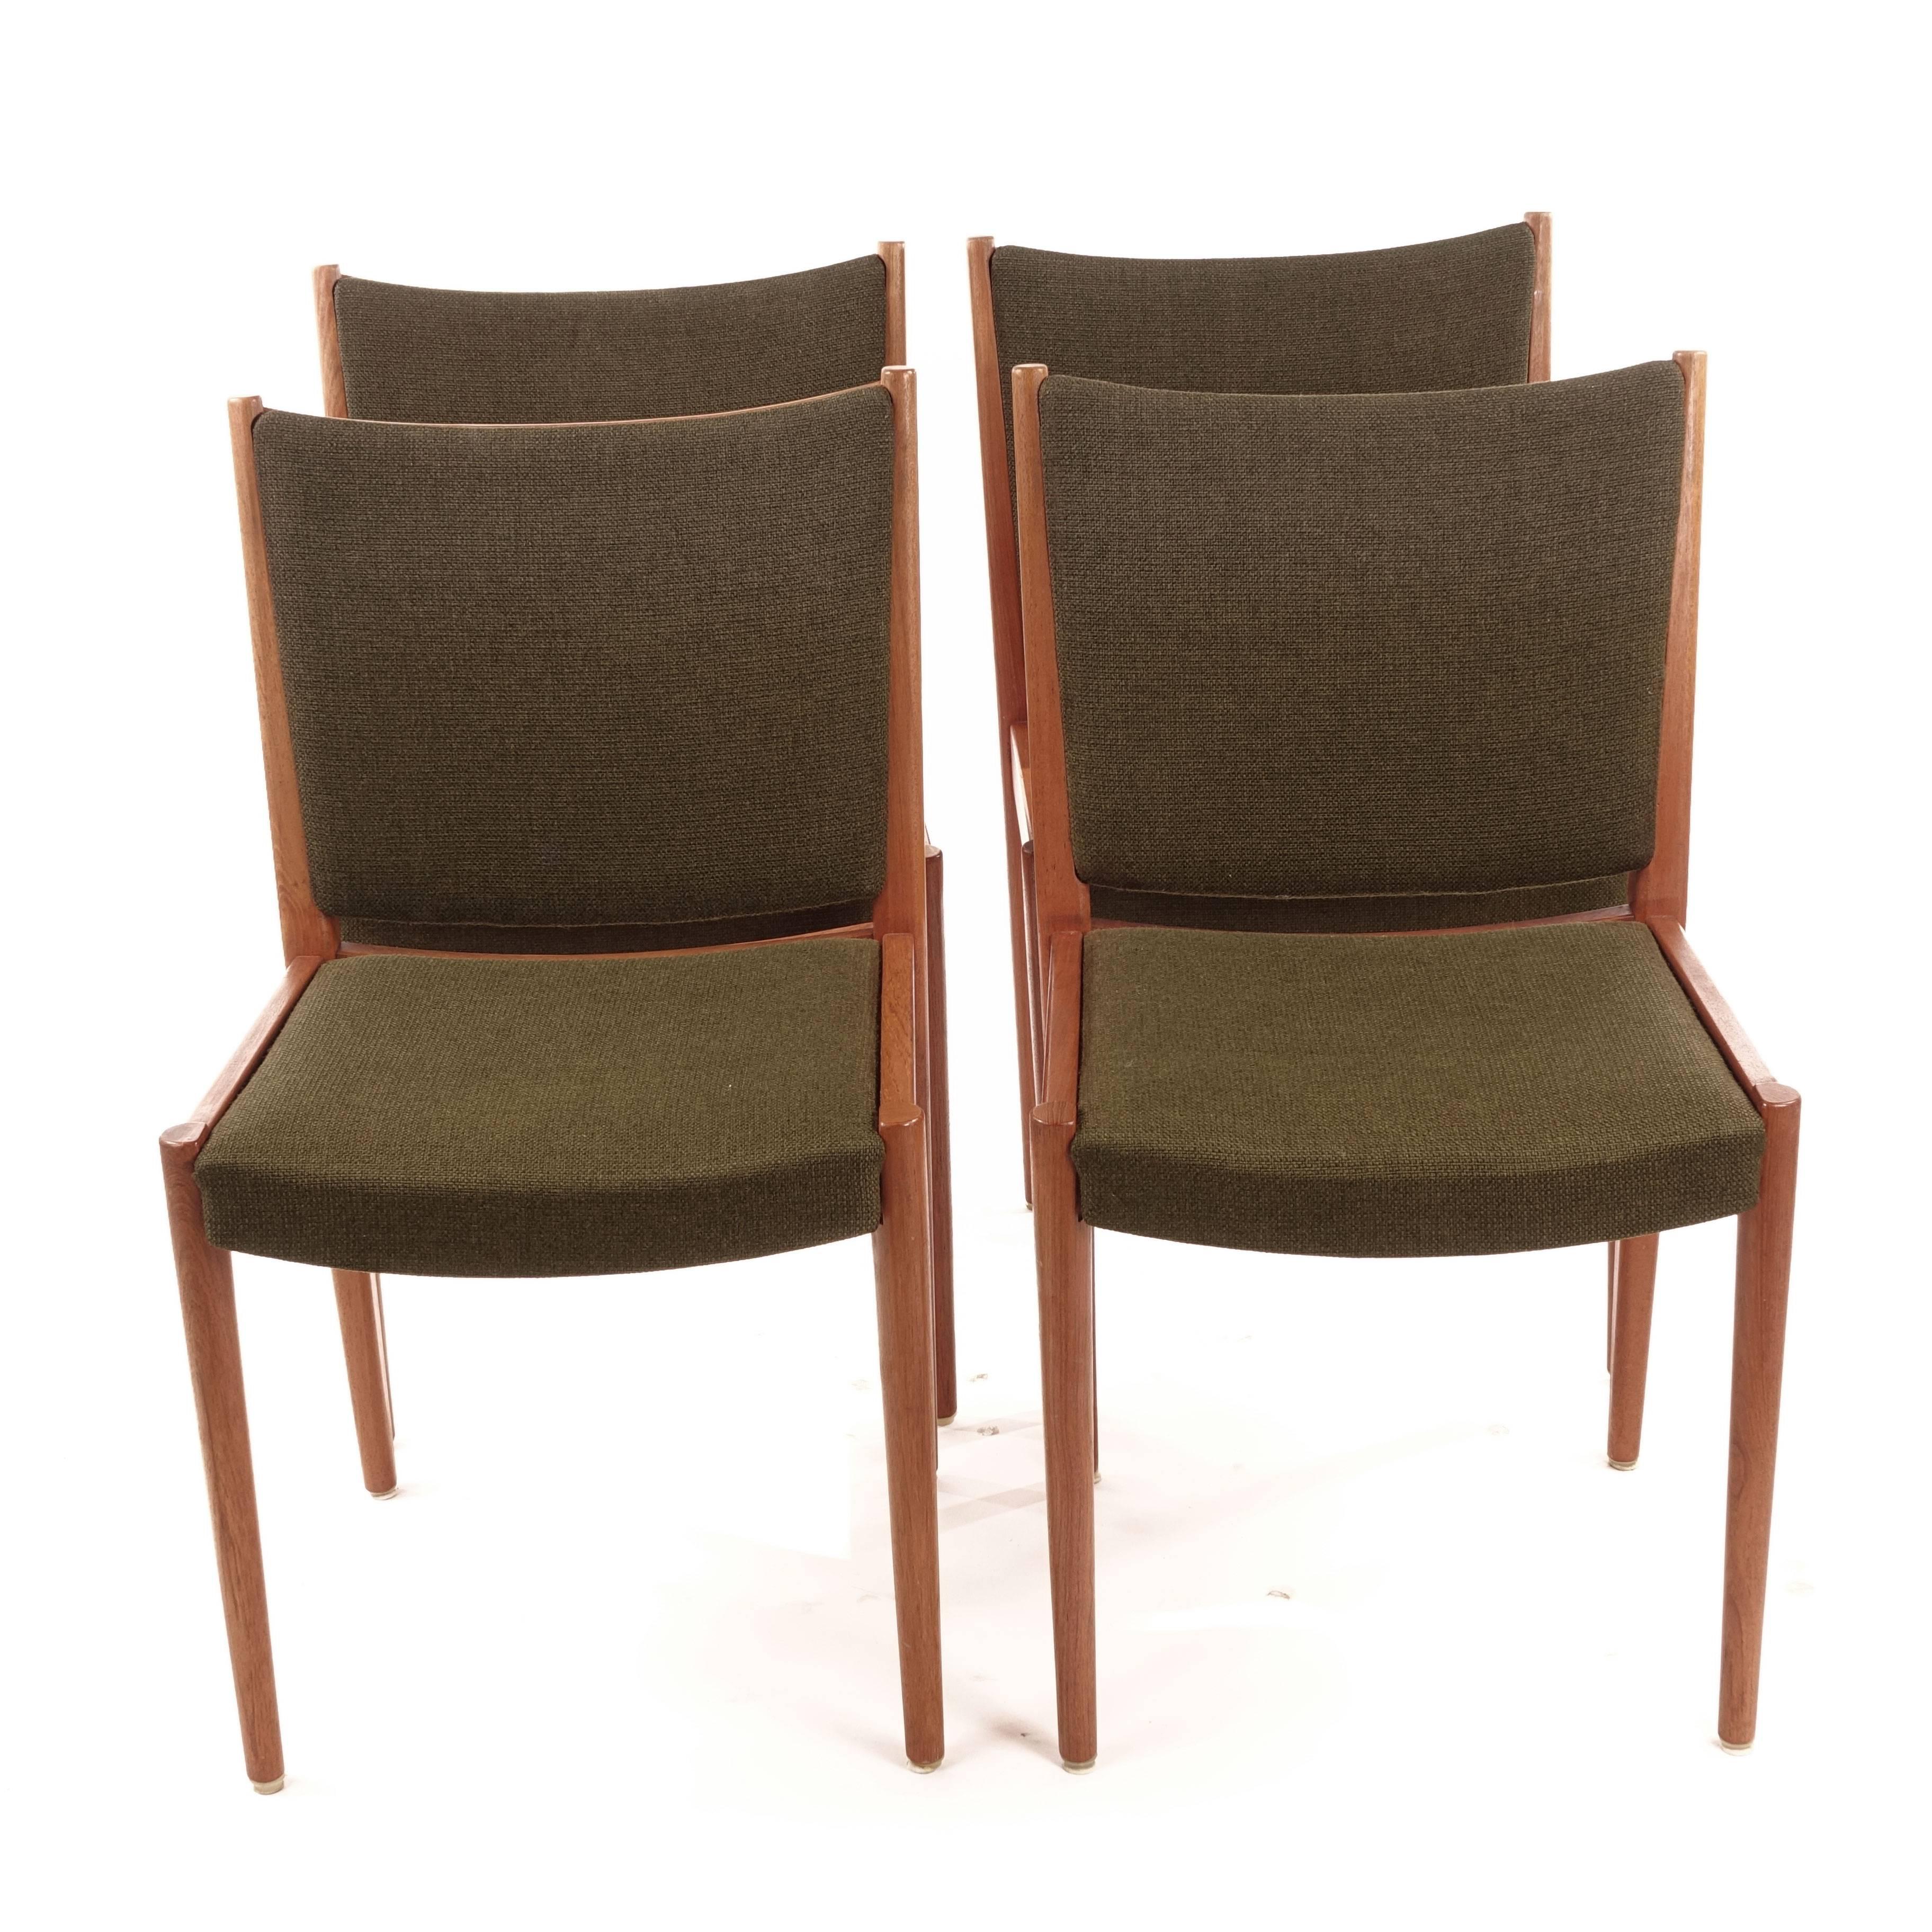 Swedish Retro Chairs from 1950s In Excellent Condition For Sale In Singapore, SG